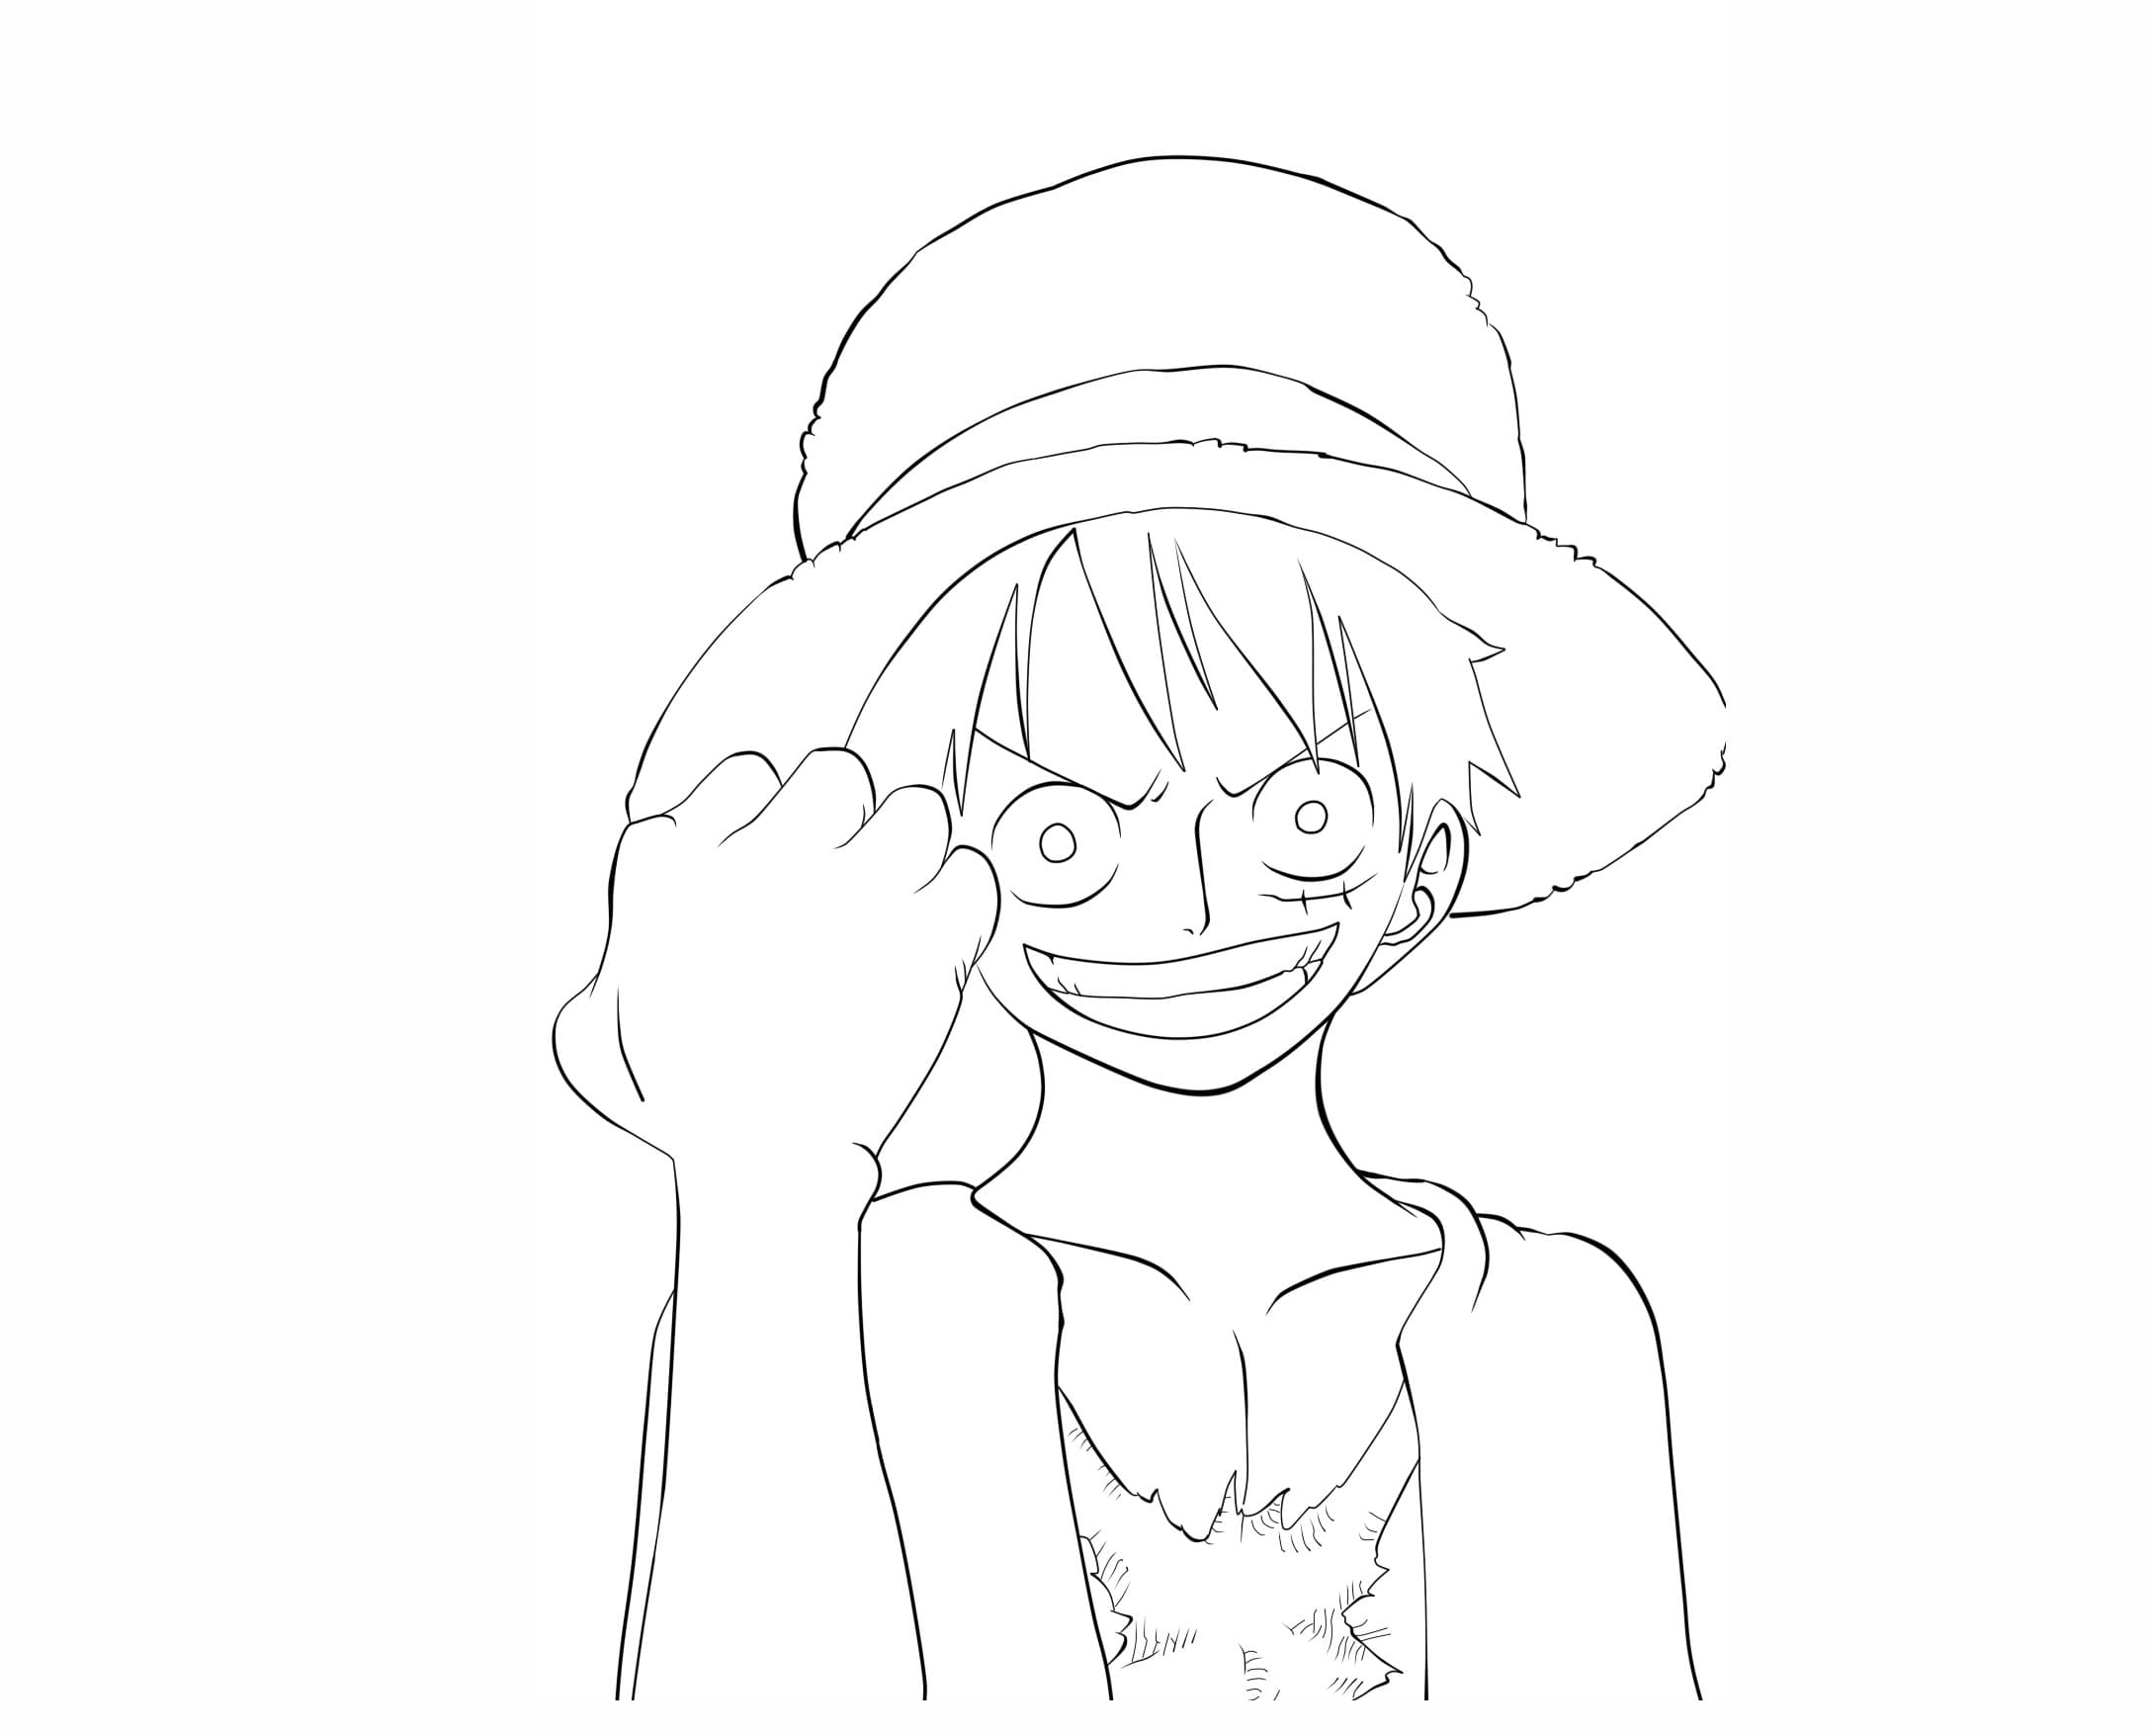 Monkey D. Luffy One Piece coloring page